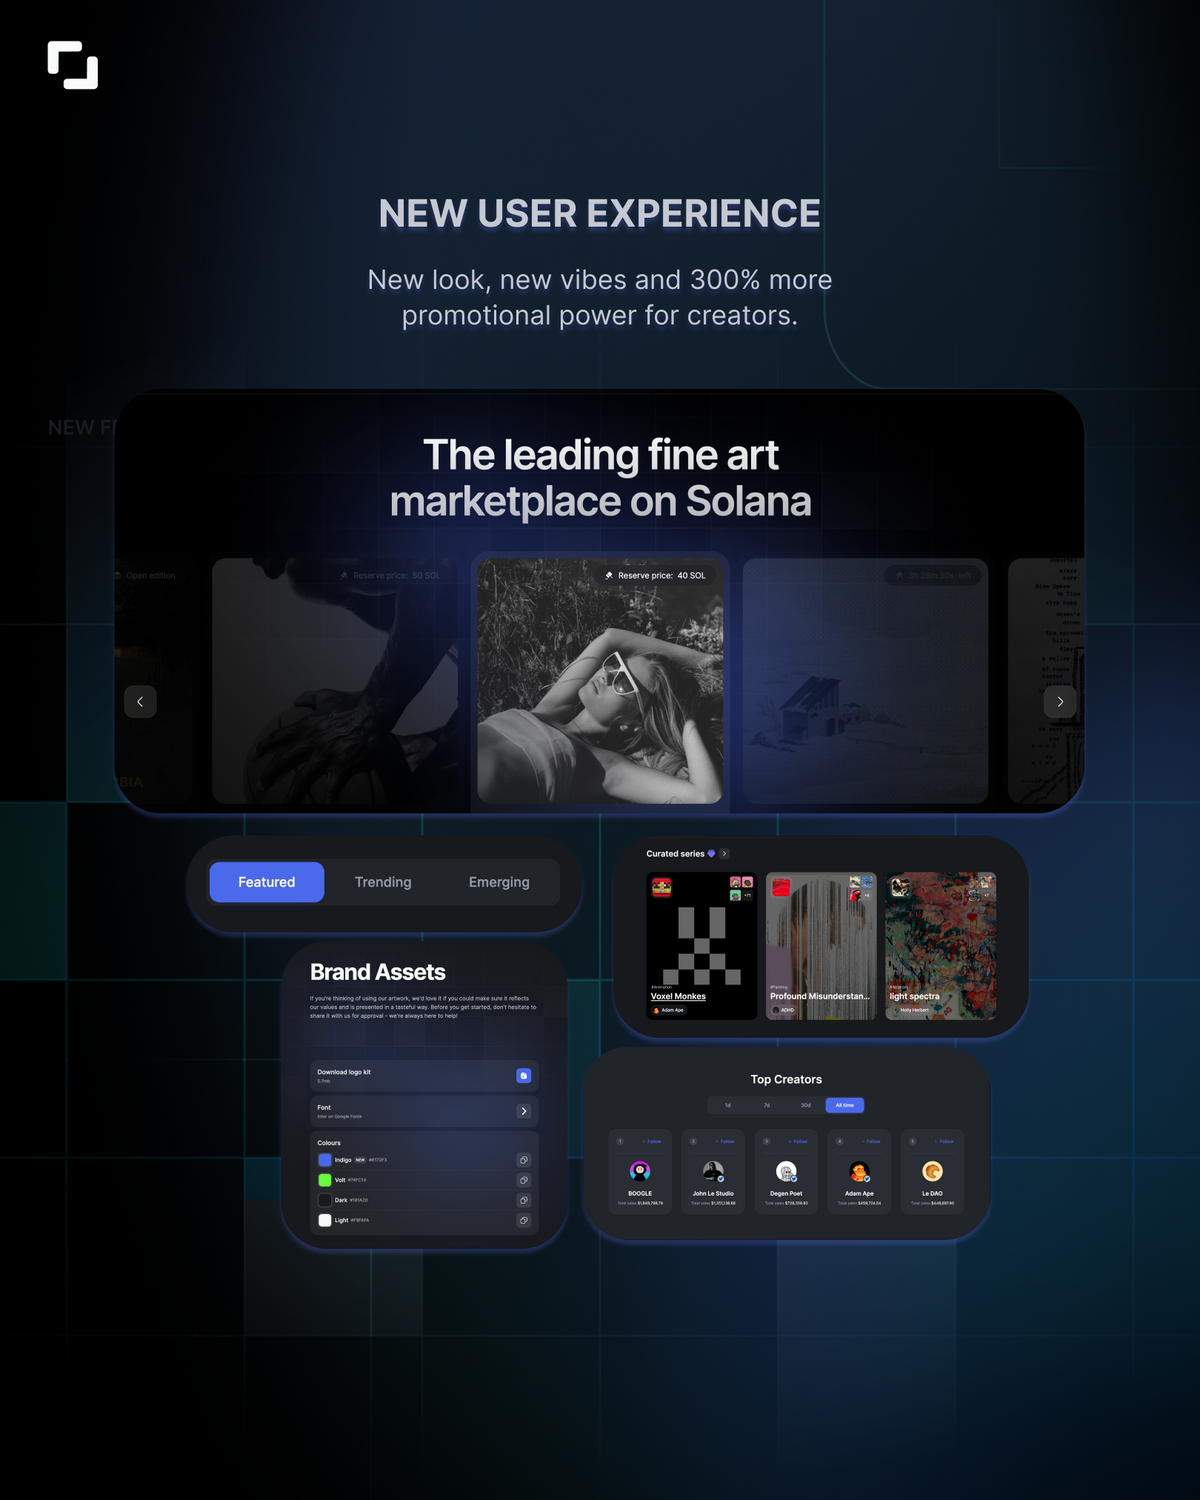 Introducing a new User Experience